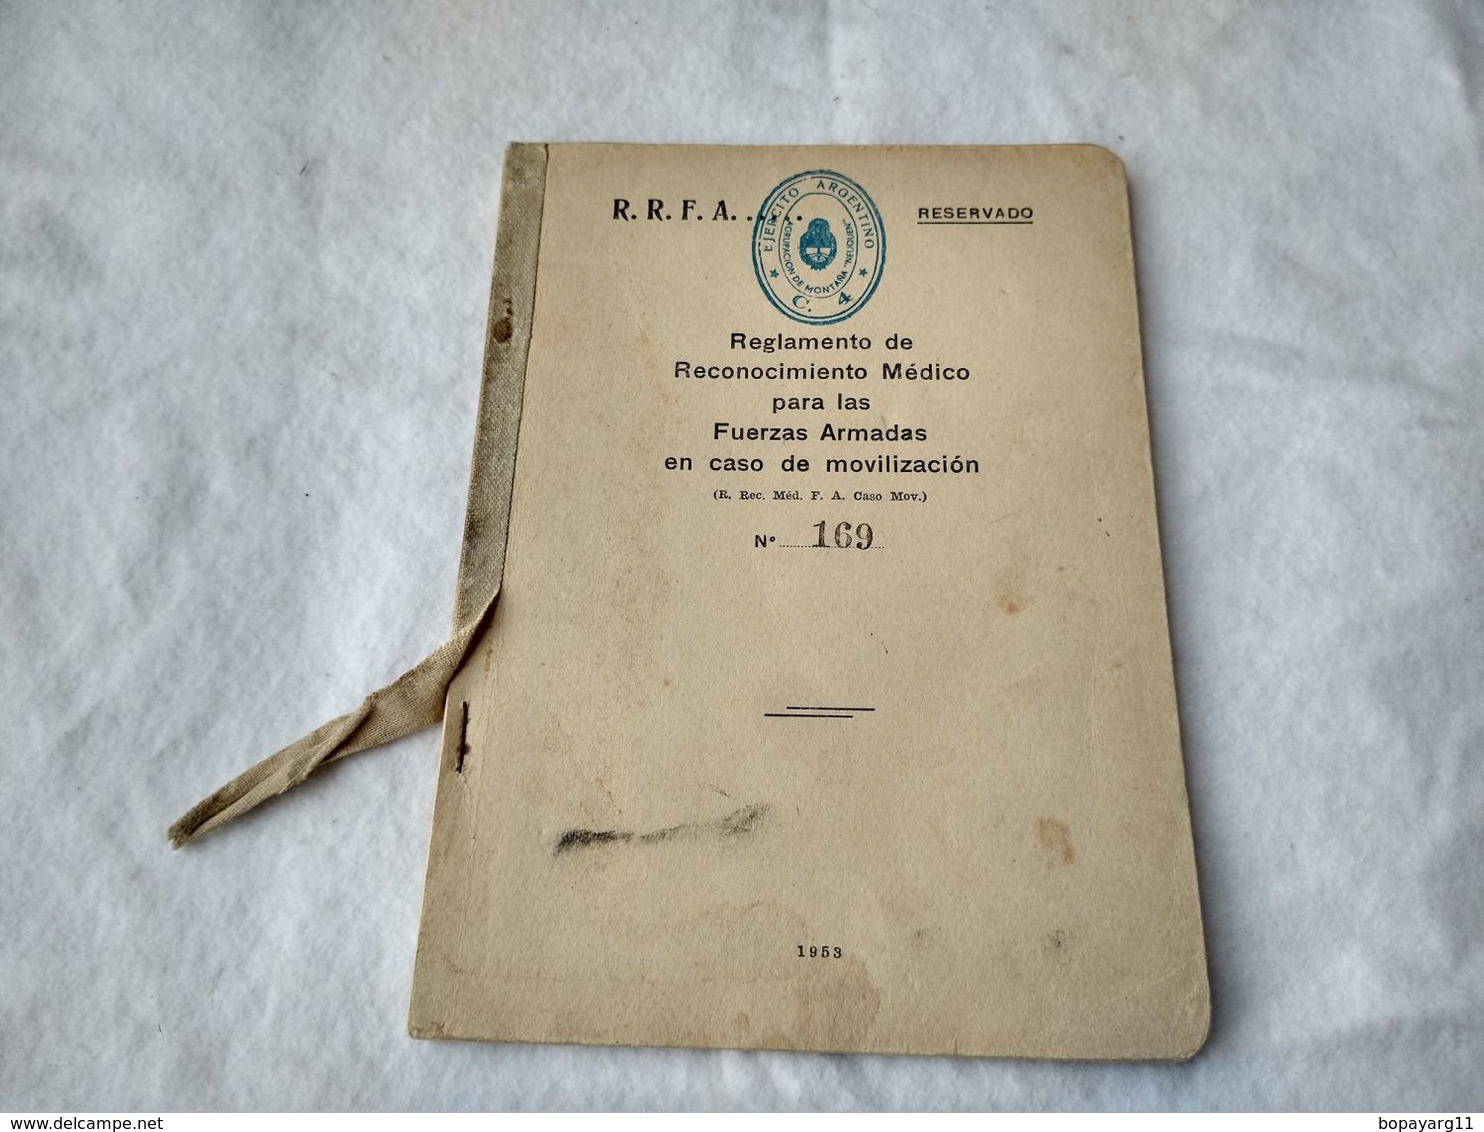 Argentina Argentine Army Classified Medical Selection Procedures 1953 Book #13 - Spanish